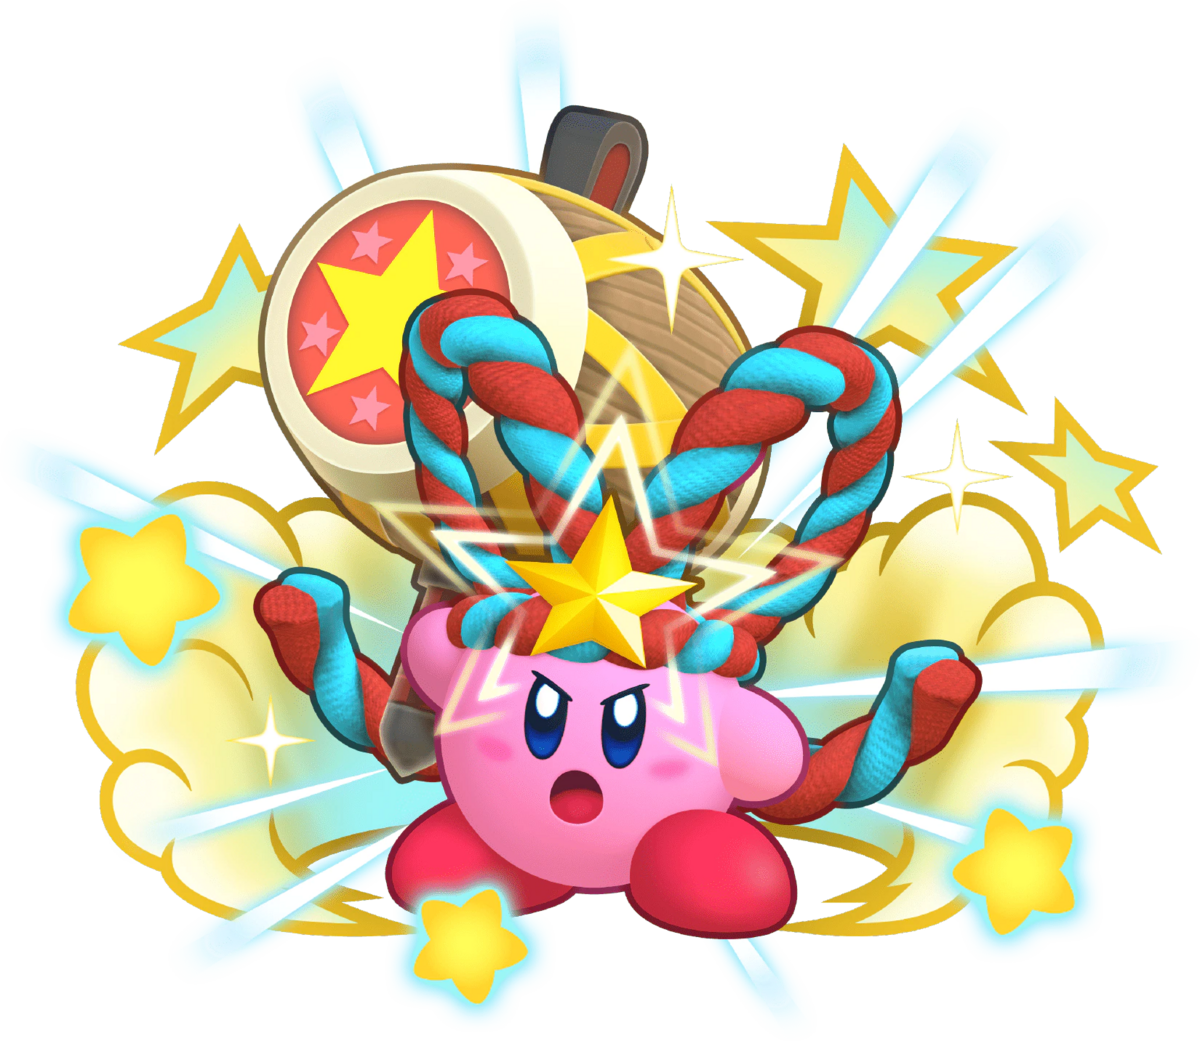 Dangerous Dinner - Stage 4 - WiKirby: it's a wiki, about Kirby!